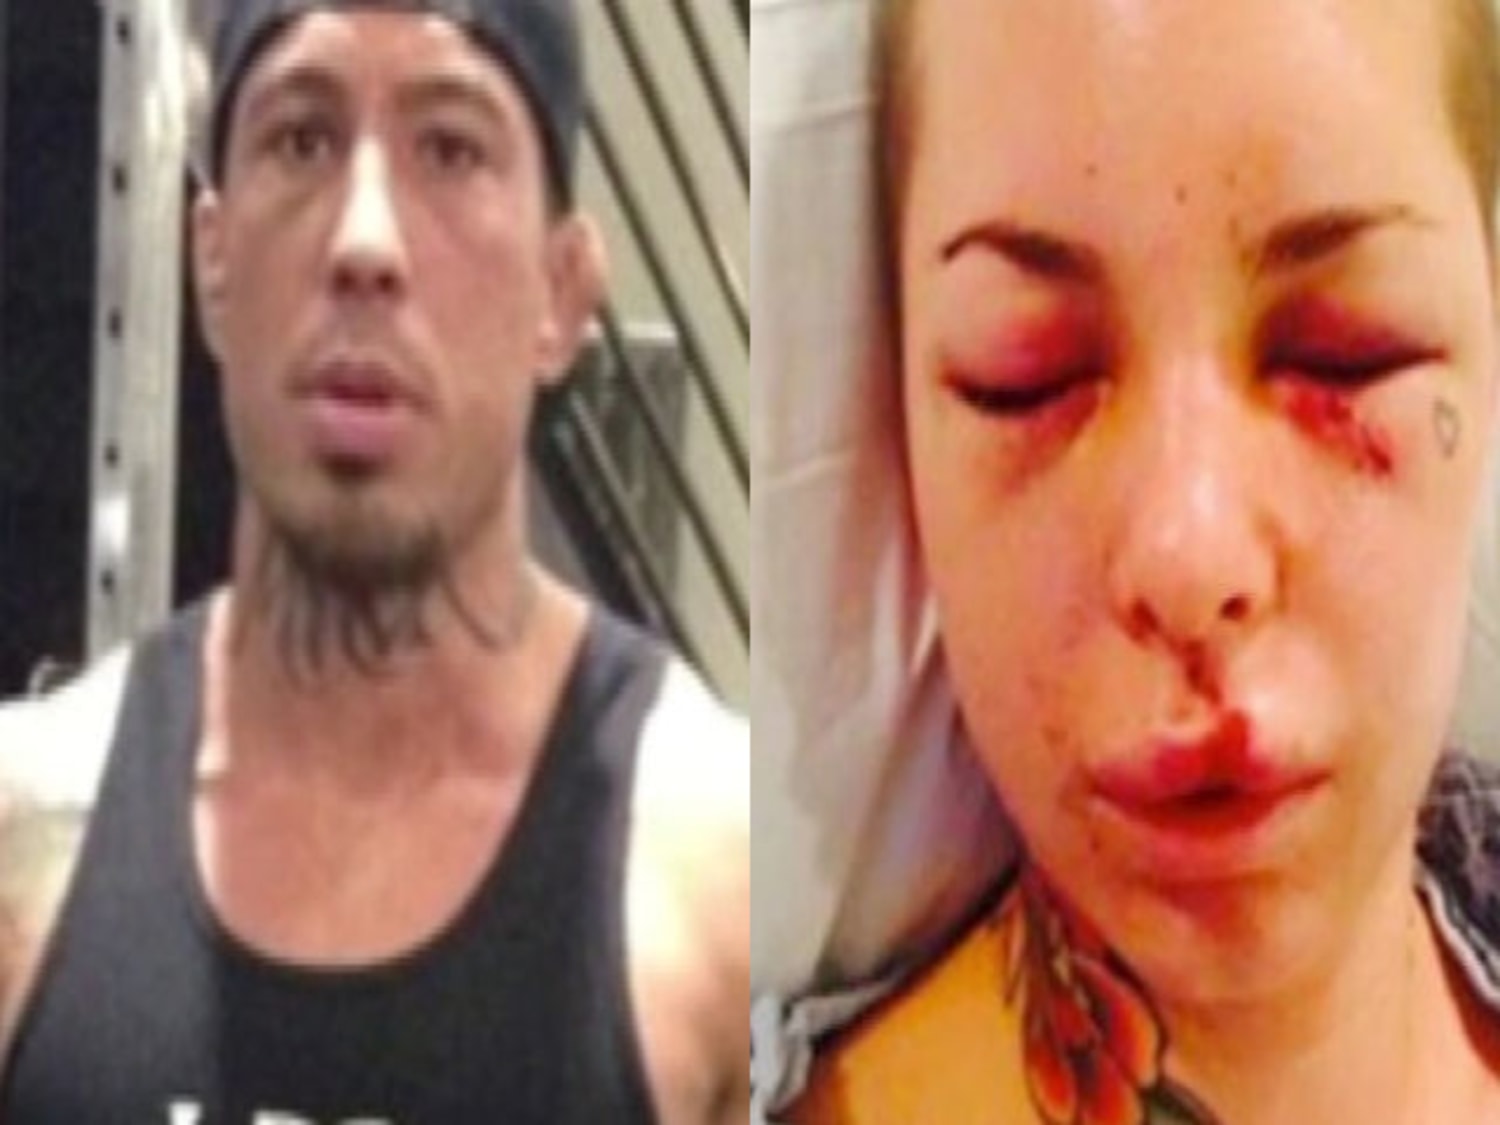 Forced Brutal Pussyfucking - War Machine' Wanted in Brutal Beating of Porn Star